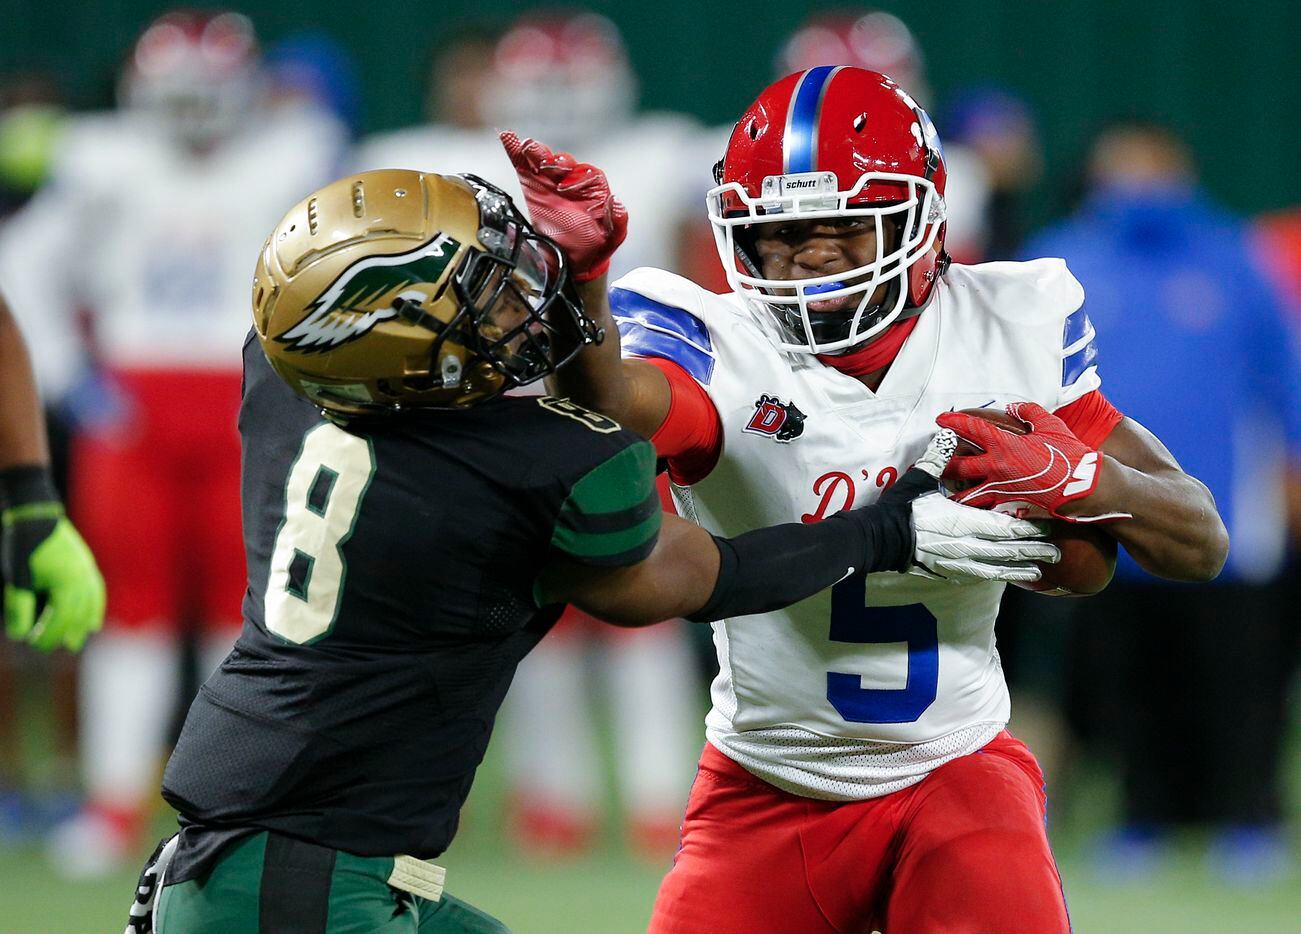 Duncanville junior running back Malachi Medlock (5) battle DeSoto senior safety D'verryon Foster (8) for yardage during the first half of a Class 6A Division I Region II final high school football game, Saturday, January 2, 2021. (Brandon Wade/Special Contributor)